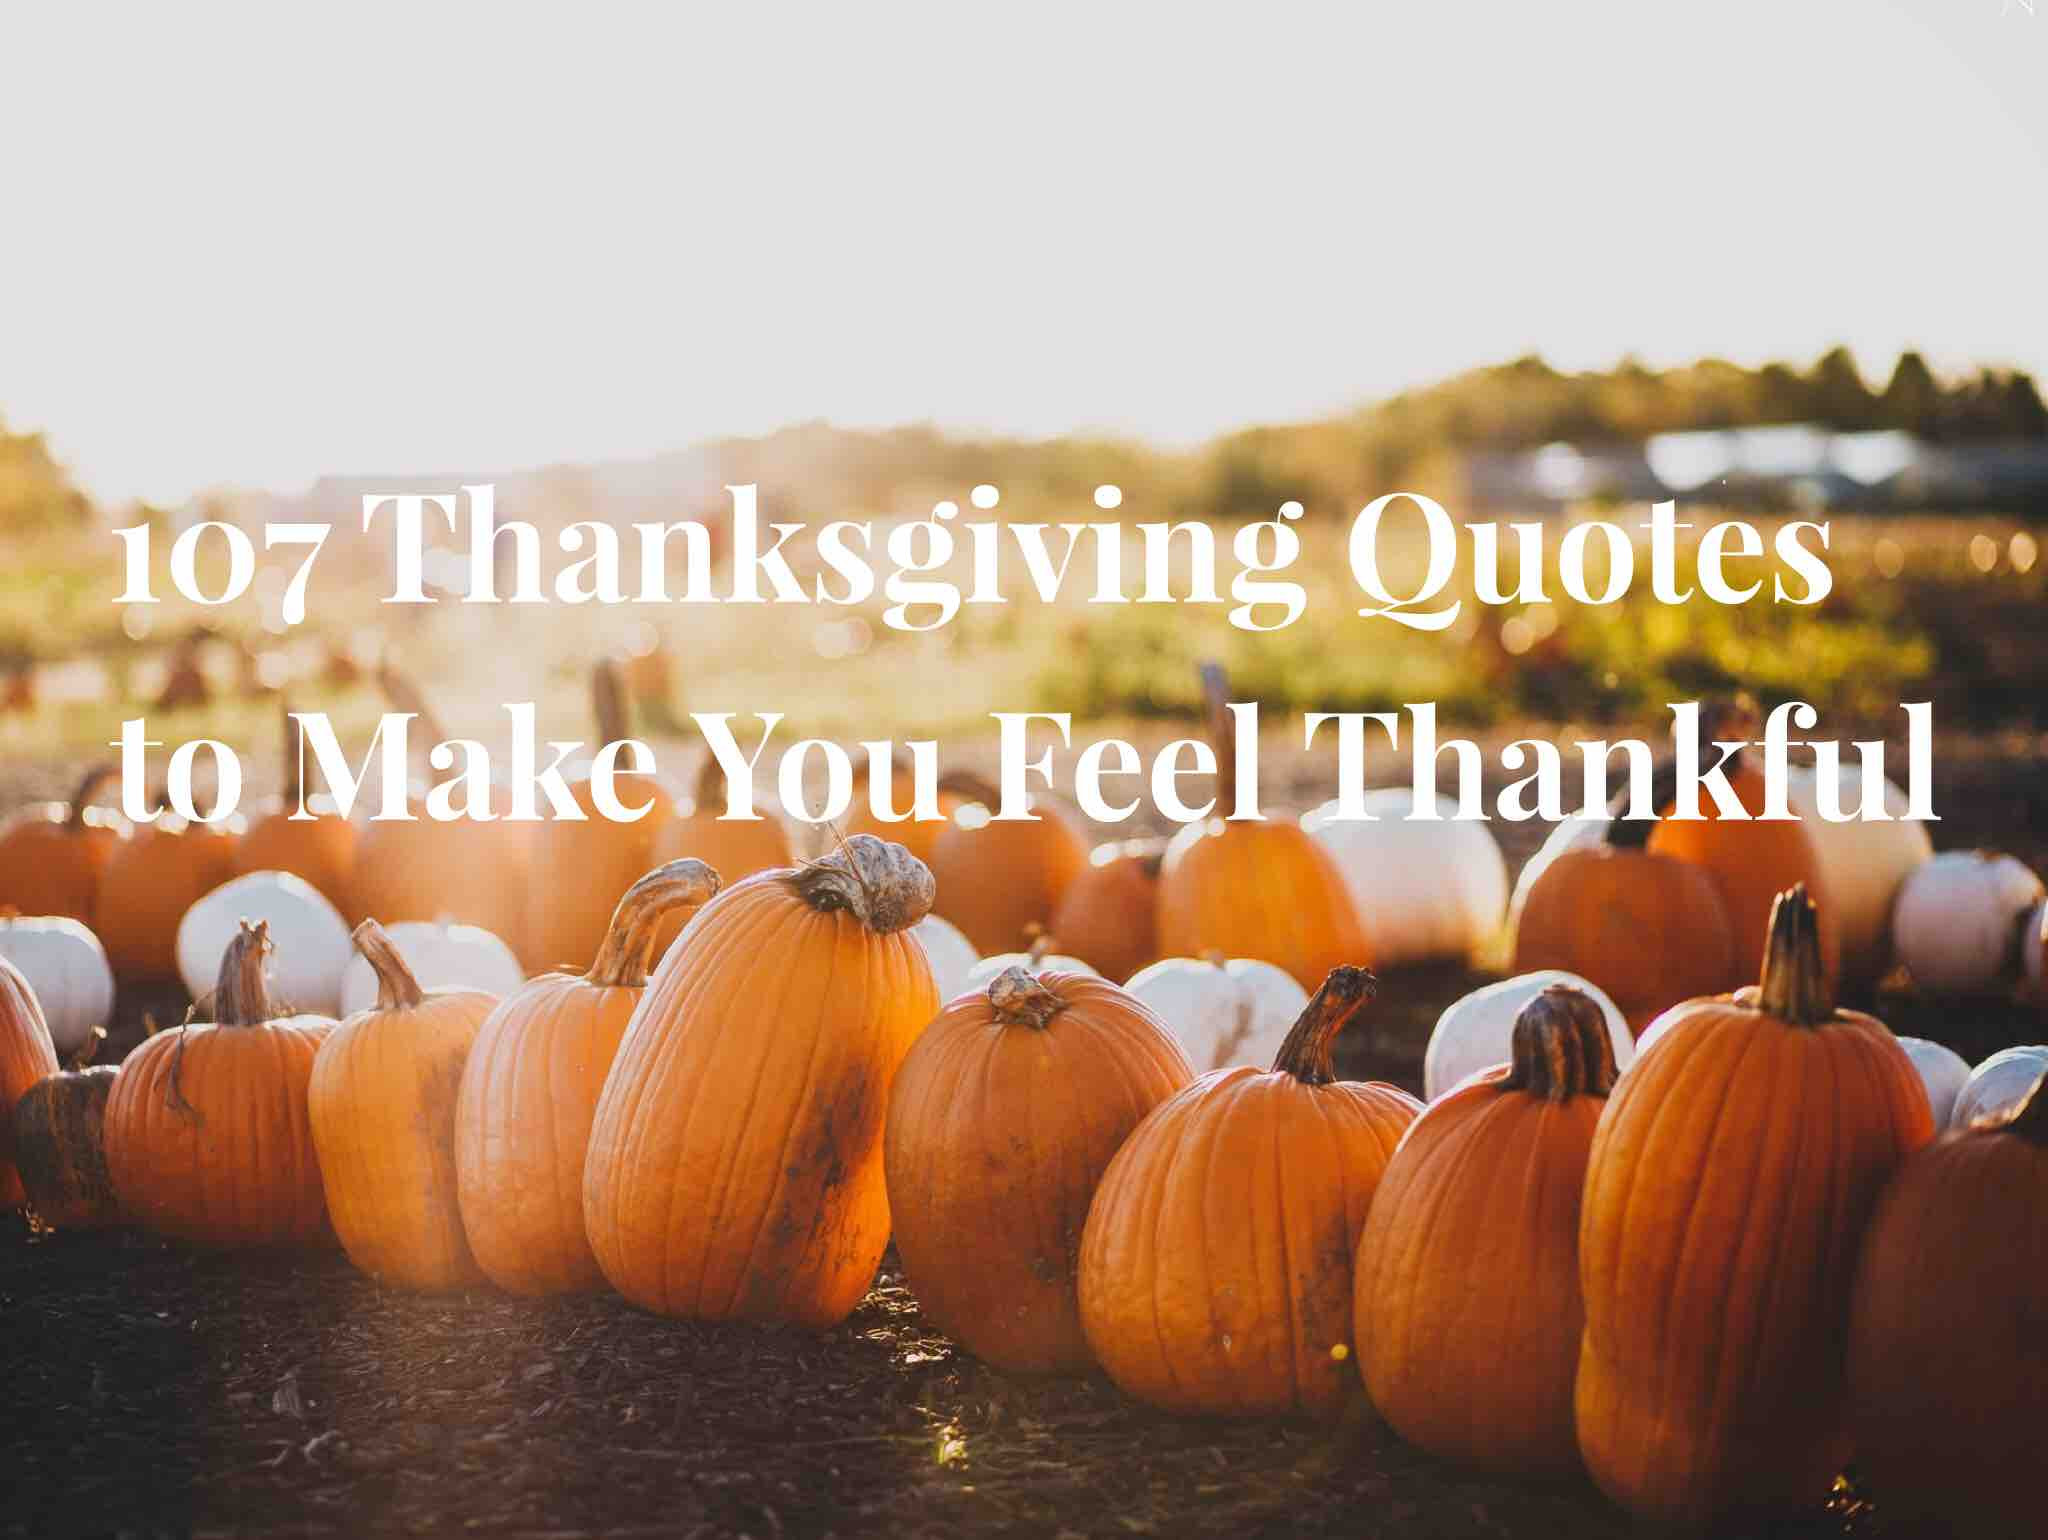 Thanksgiving Quotes Christian
 107 Thanksgiving Quotes to Make You Feel Thankful